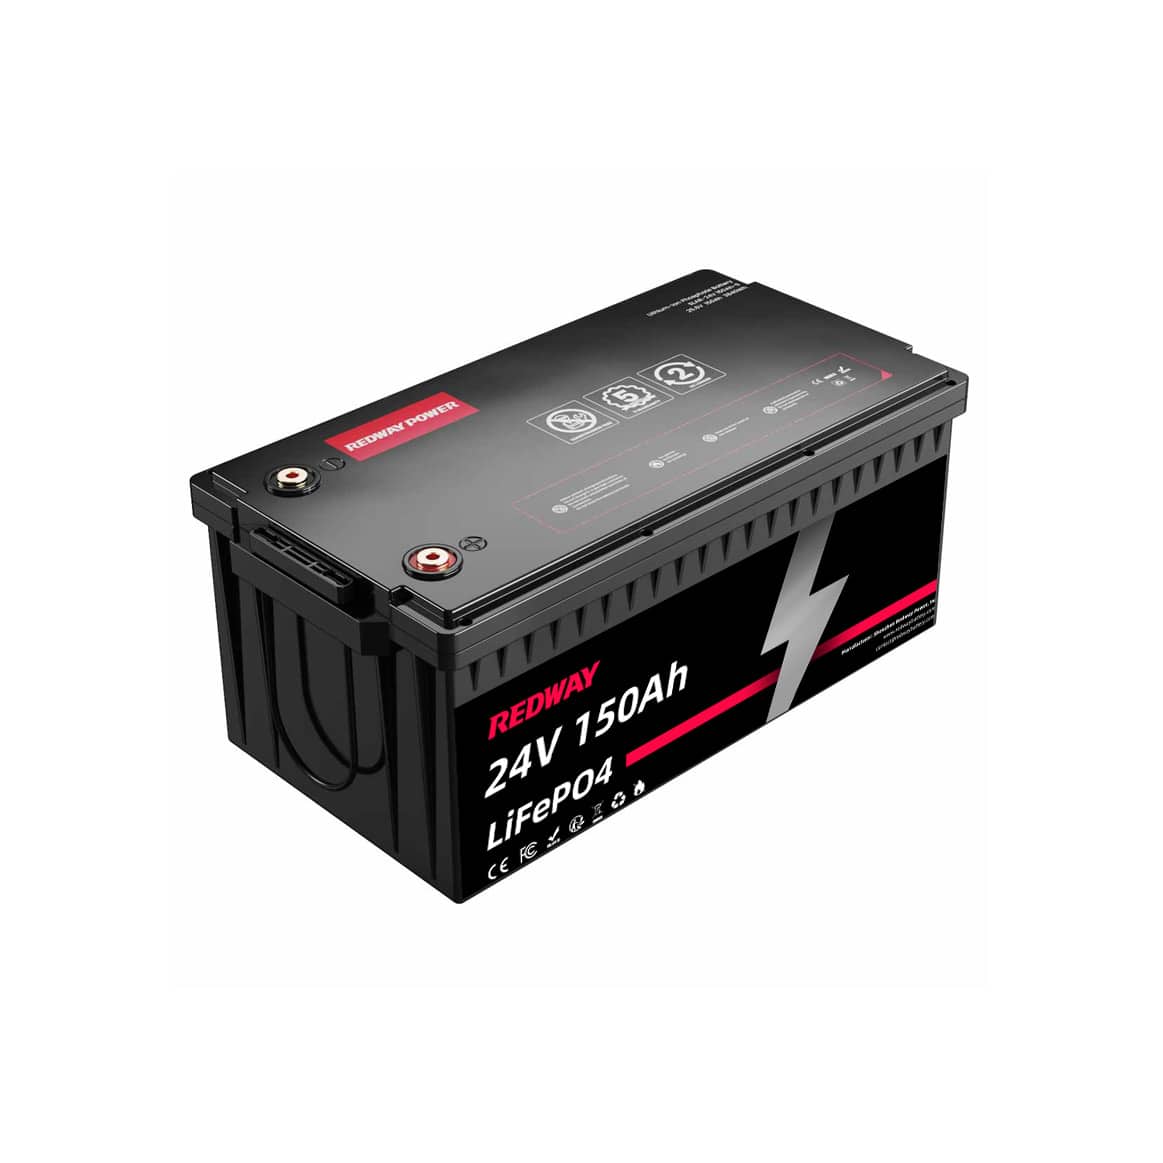 Redway Battery 24V150Ah Lithium Battery (Group 8D)